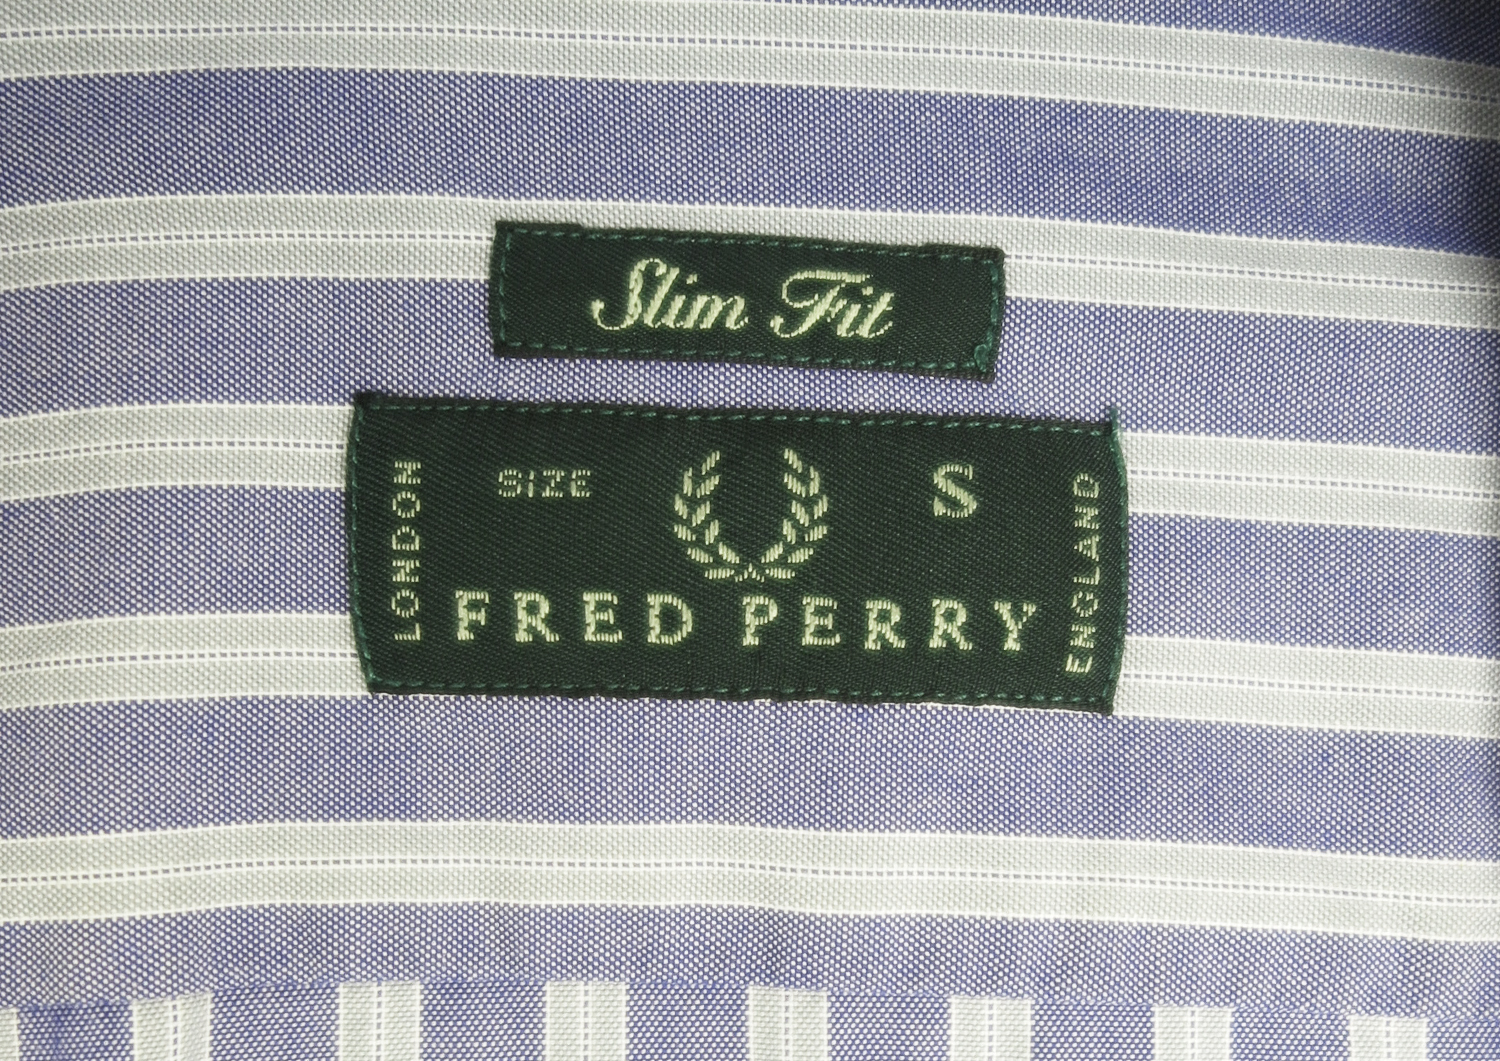 Fred Perry Blue and Grey Striped Shirt - L | Reign Vintage